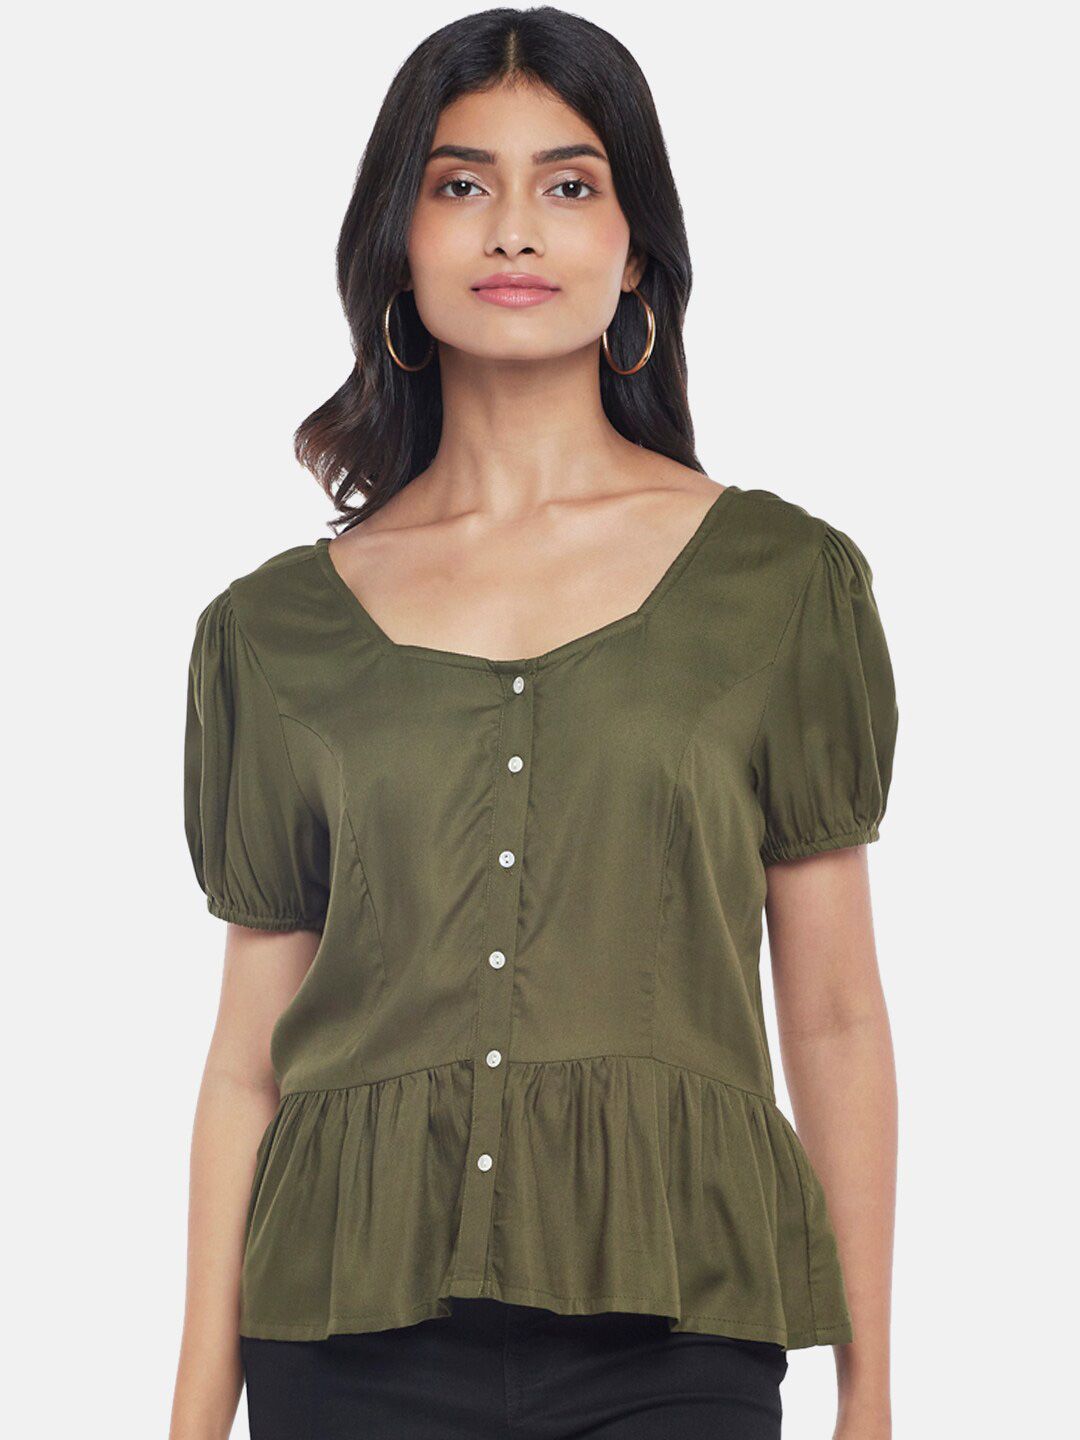 Honey by Pantaloons Olive Green Peplum Top Price in India